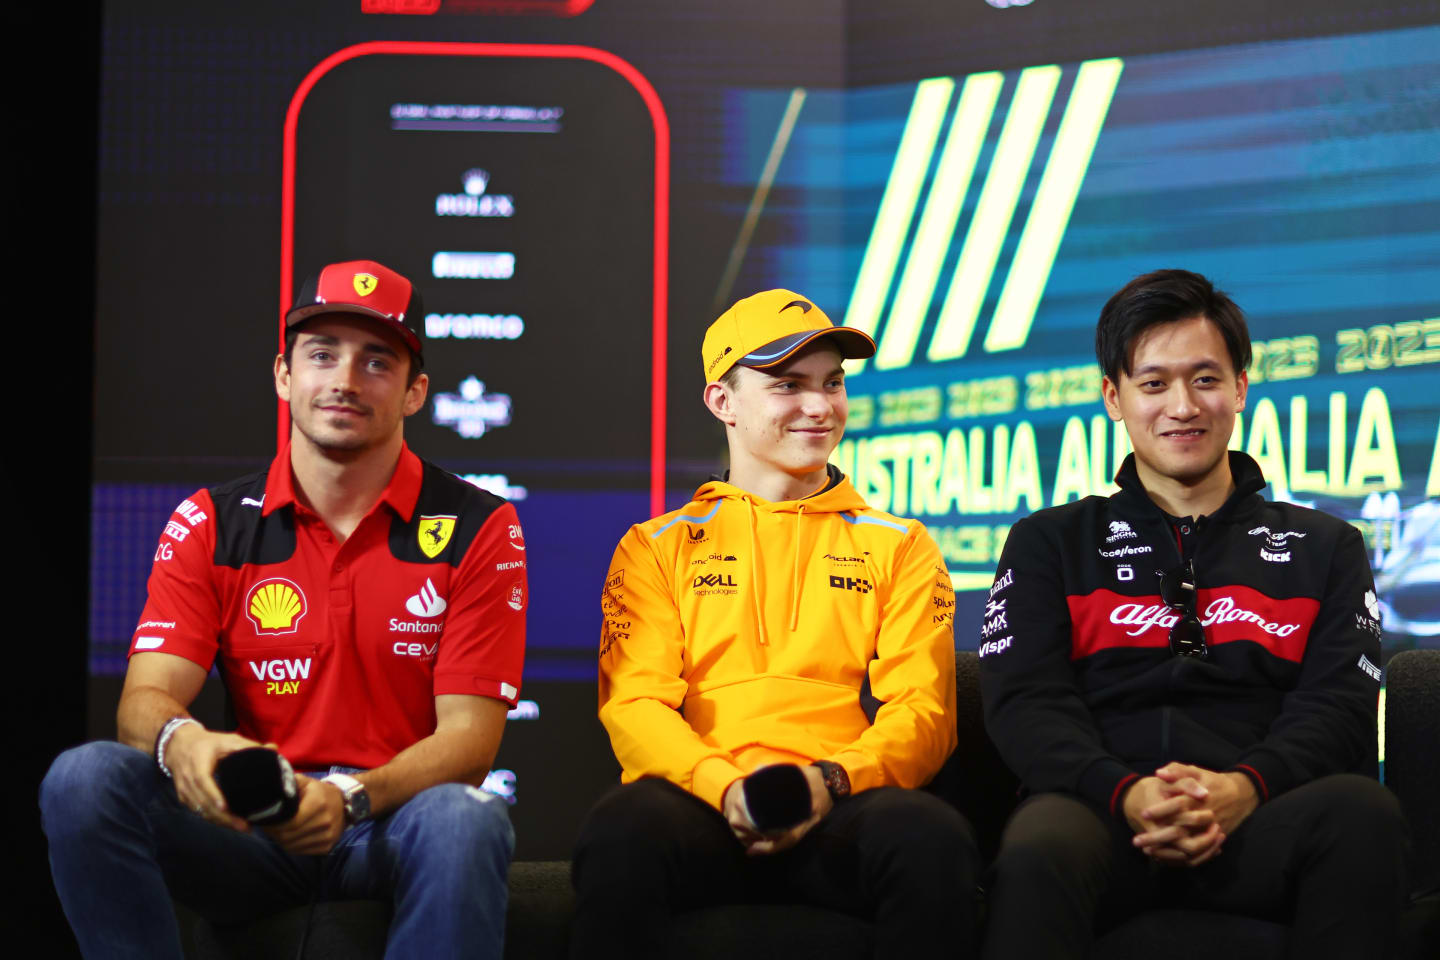 MELBOURNE, AUSTRALIA - MARCH 30: Charles Leclerc of Monaco and Ferrari, Lando Norris of Great Britain and McLaren and Zhou Guanyu of China and Alfa Romeo F1 attend the Drivers Press Conference during previews ahead of the F1 Grand Prix of Australia at Albert Park Grand Prix Circuit on March 30, 2023 in Melbourne, Australia. (Photo by Dan Istitene/Getty Images)